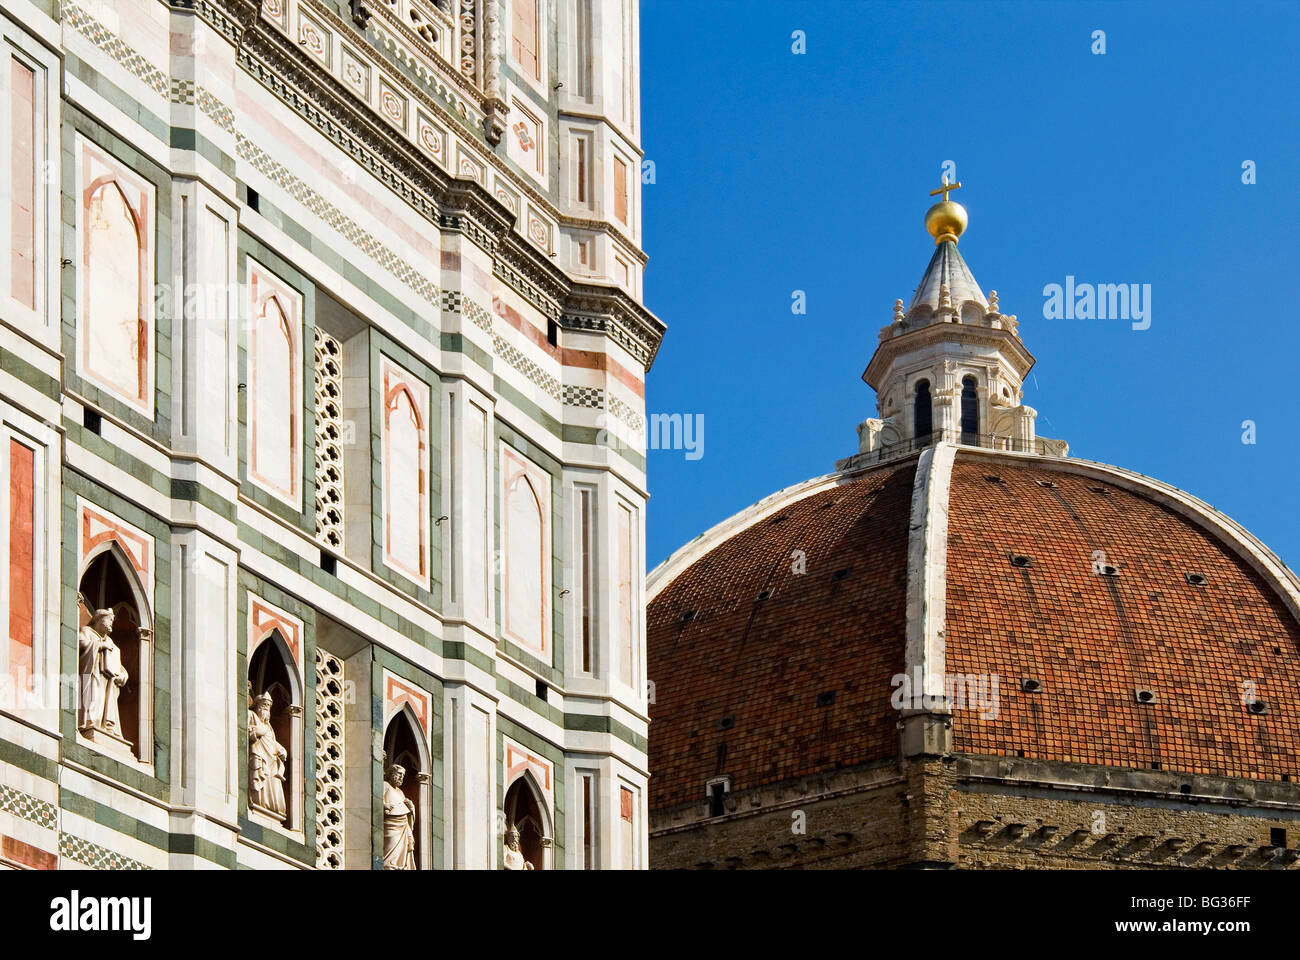 The Duomo (Cathedral), Florence, UNESCO World Heritage Site, Tuscany, Italy, Europe Stock Photo